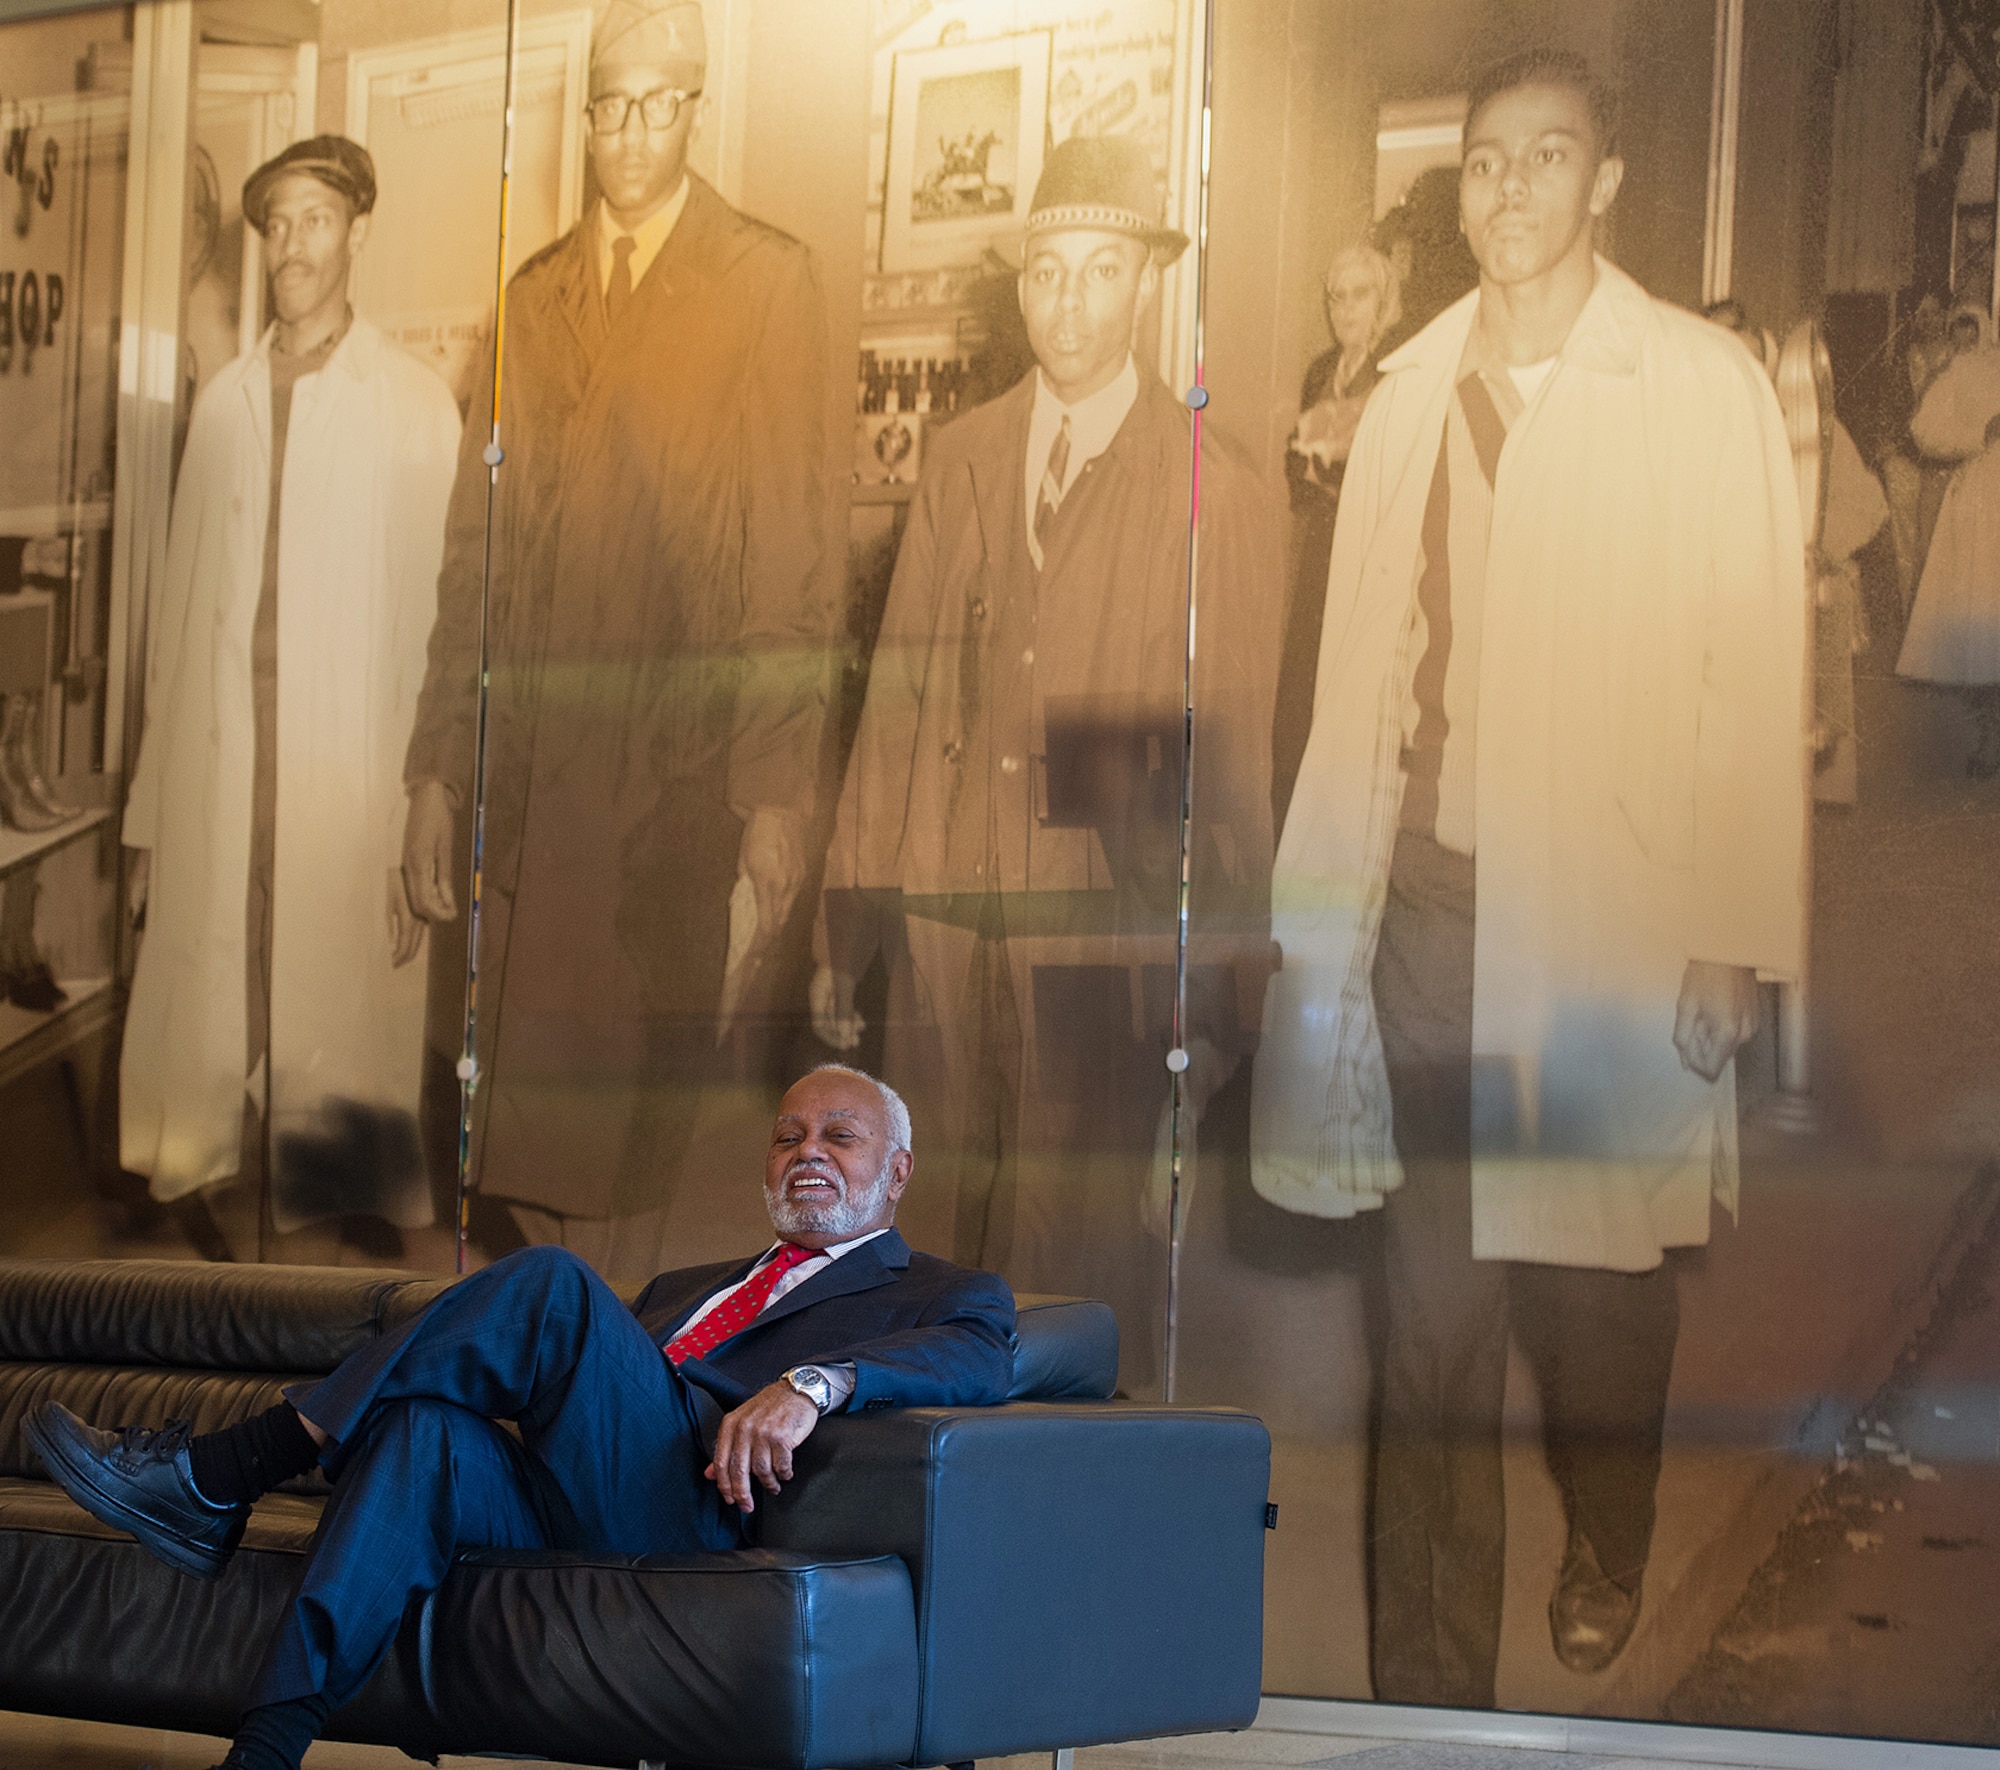 Retired Maj. Gen. Joseph McNeil at the International Civil Rights Center and Museum in Greensboro, North Carolina. The 1960s-era Woolworth's lunch counter where McNeil and three of his college classmates staged a historic sit-in is the centerpiece of the museum. (Tech. Sgt. Stephen Schester)